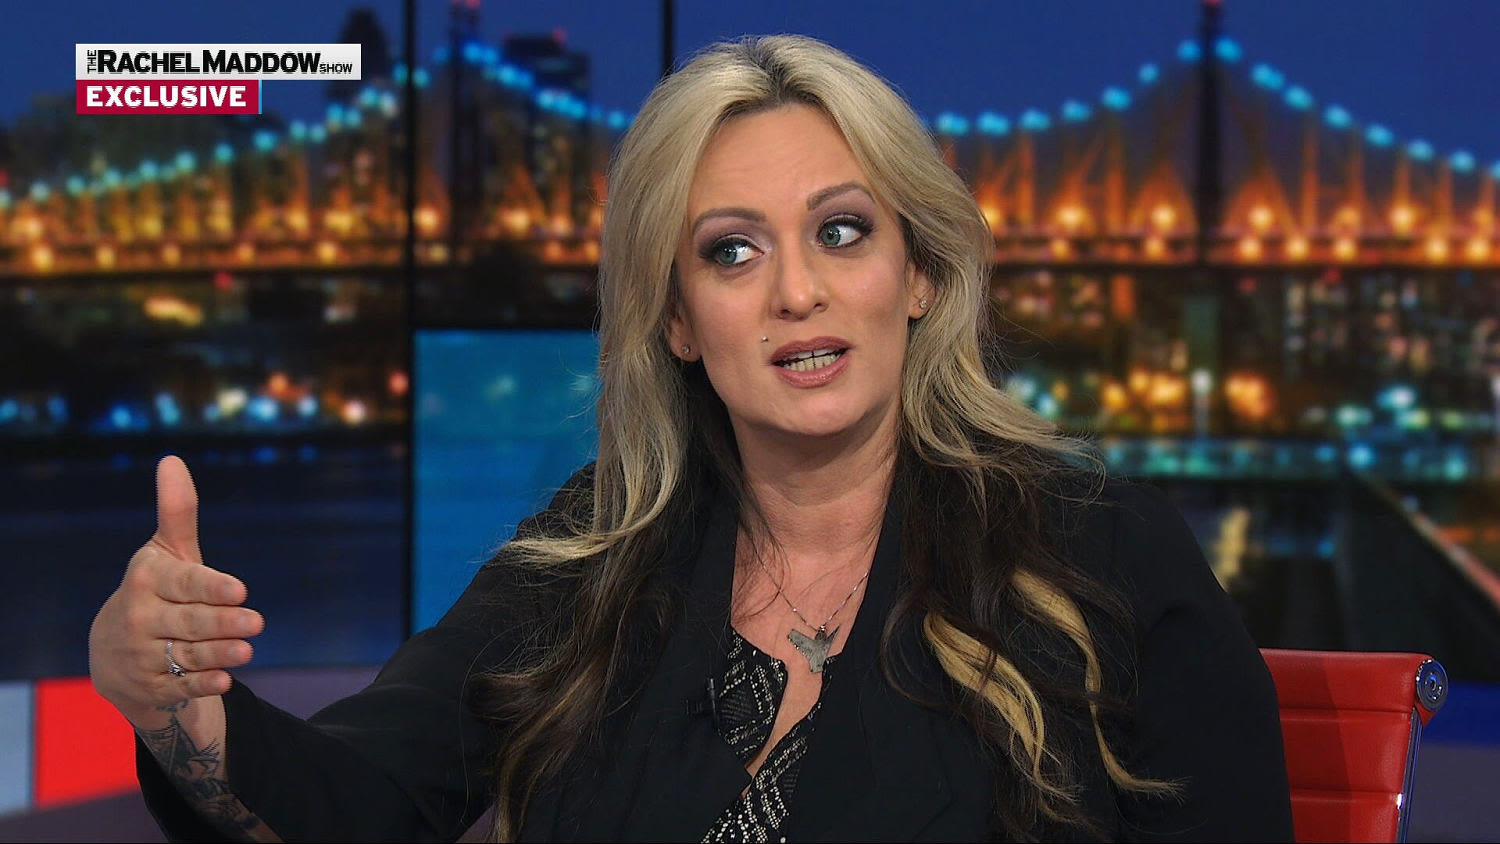 Maddow Blog | Exclusive: Stormy Daniels shares new details of her traumatic encounter with Donald Trump